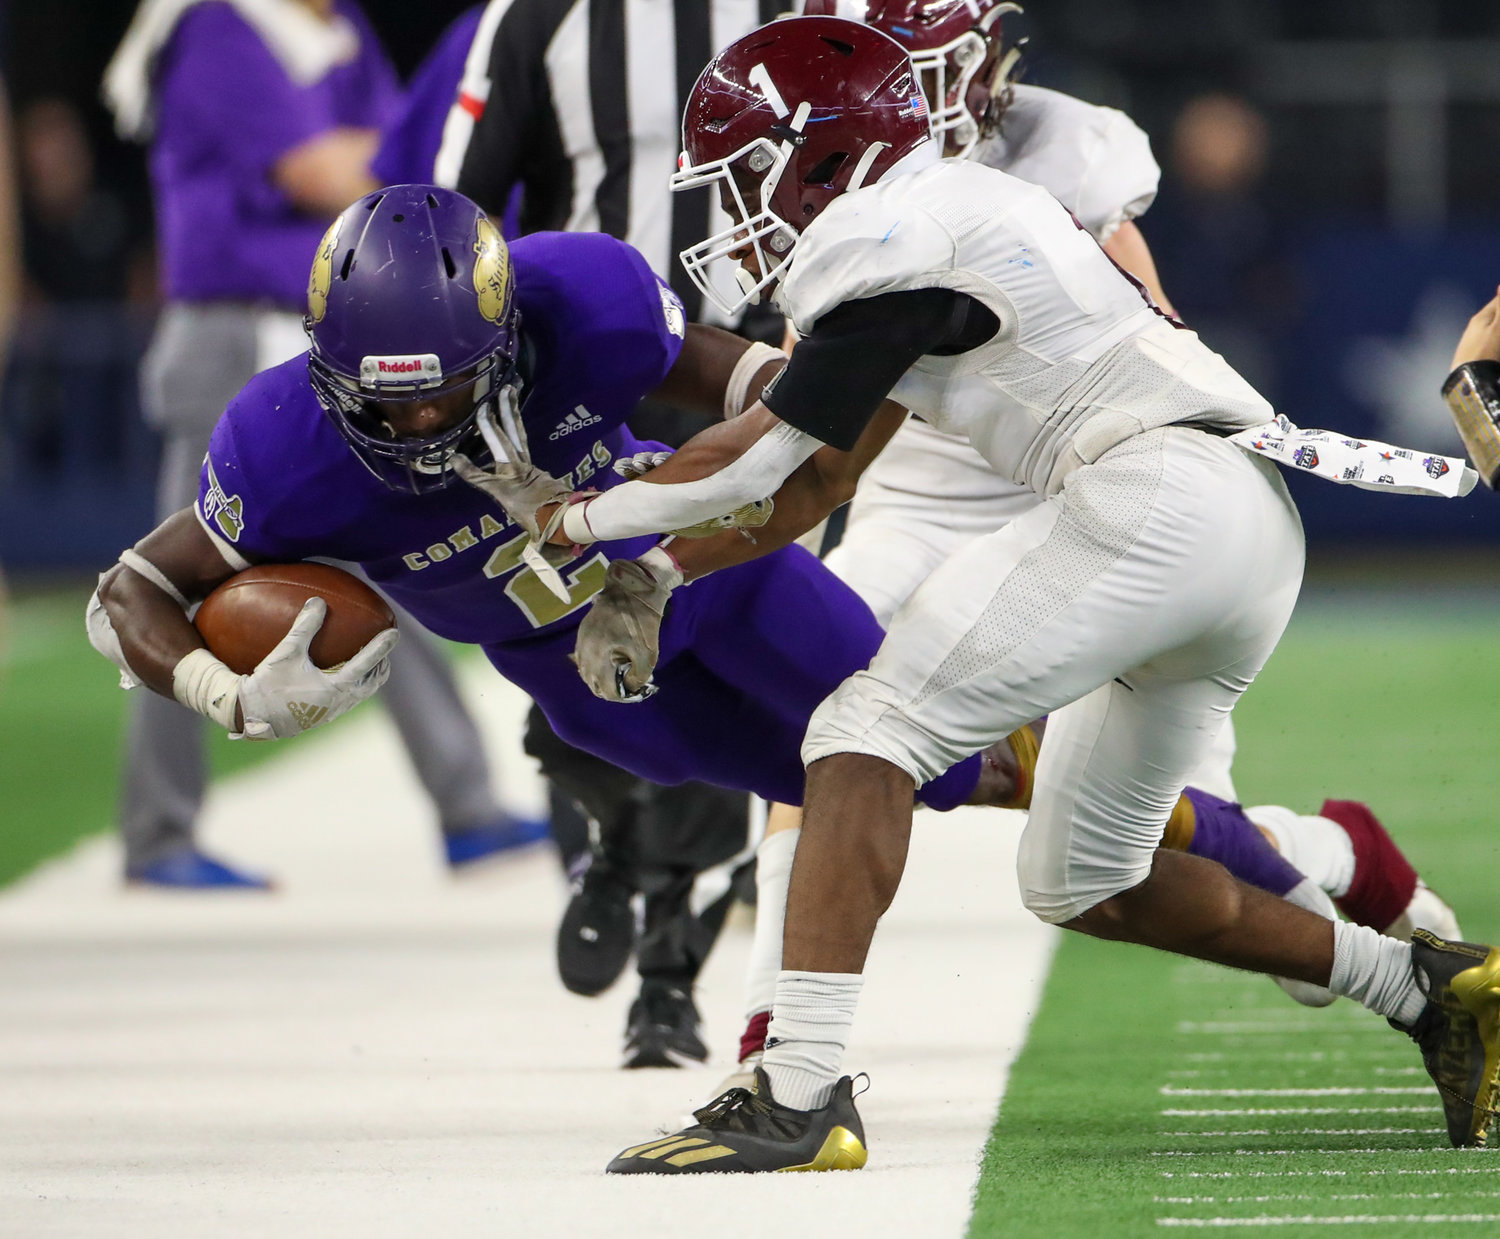 Shiner Comanches junior Dalton Brooks (2) is pushed out of bounds during the Class 2A Division I state football championship game between Shiner and Hawley on December 15, 2021 in Arlington, Texas.